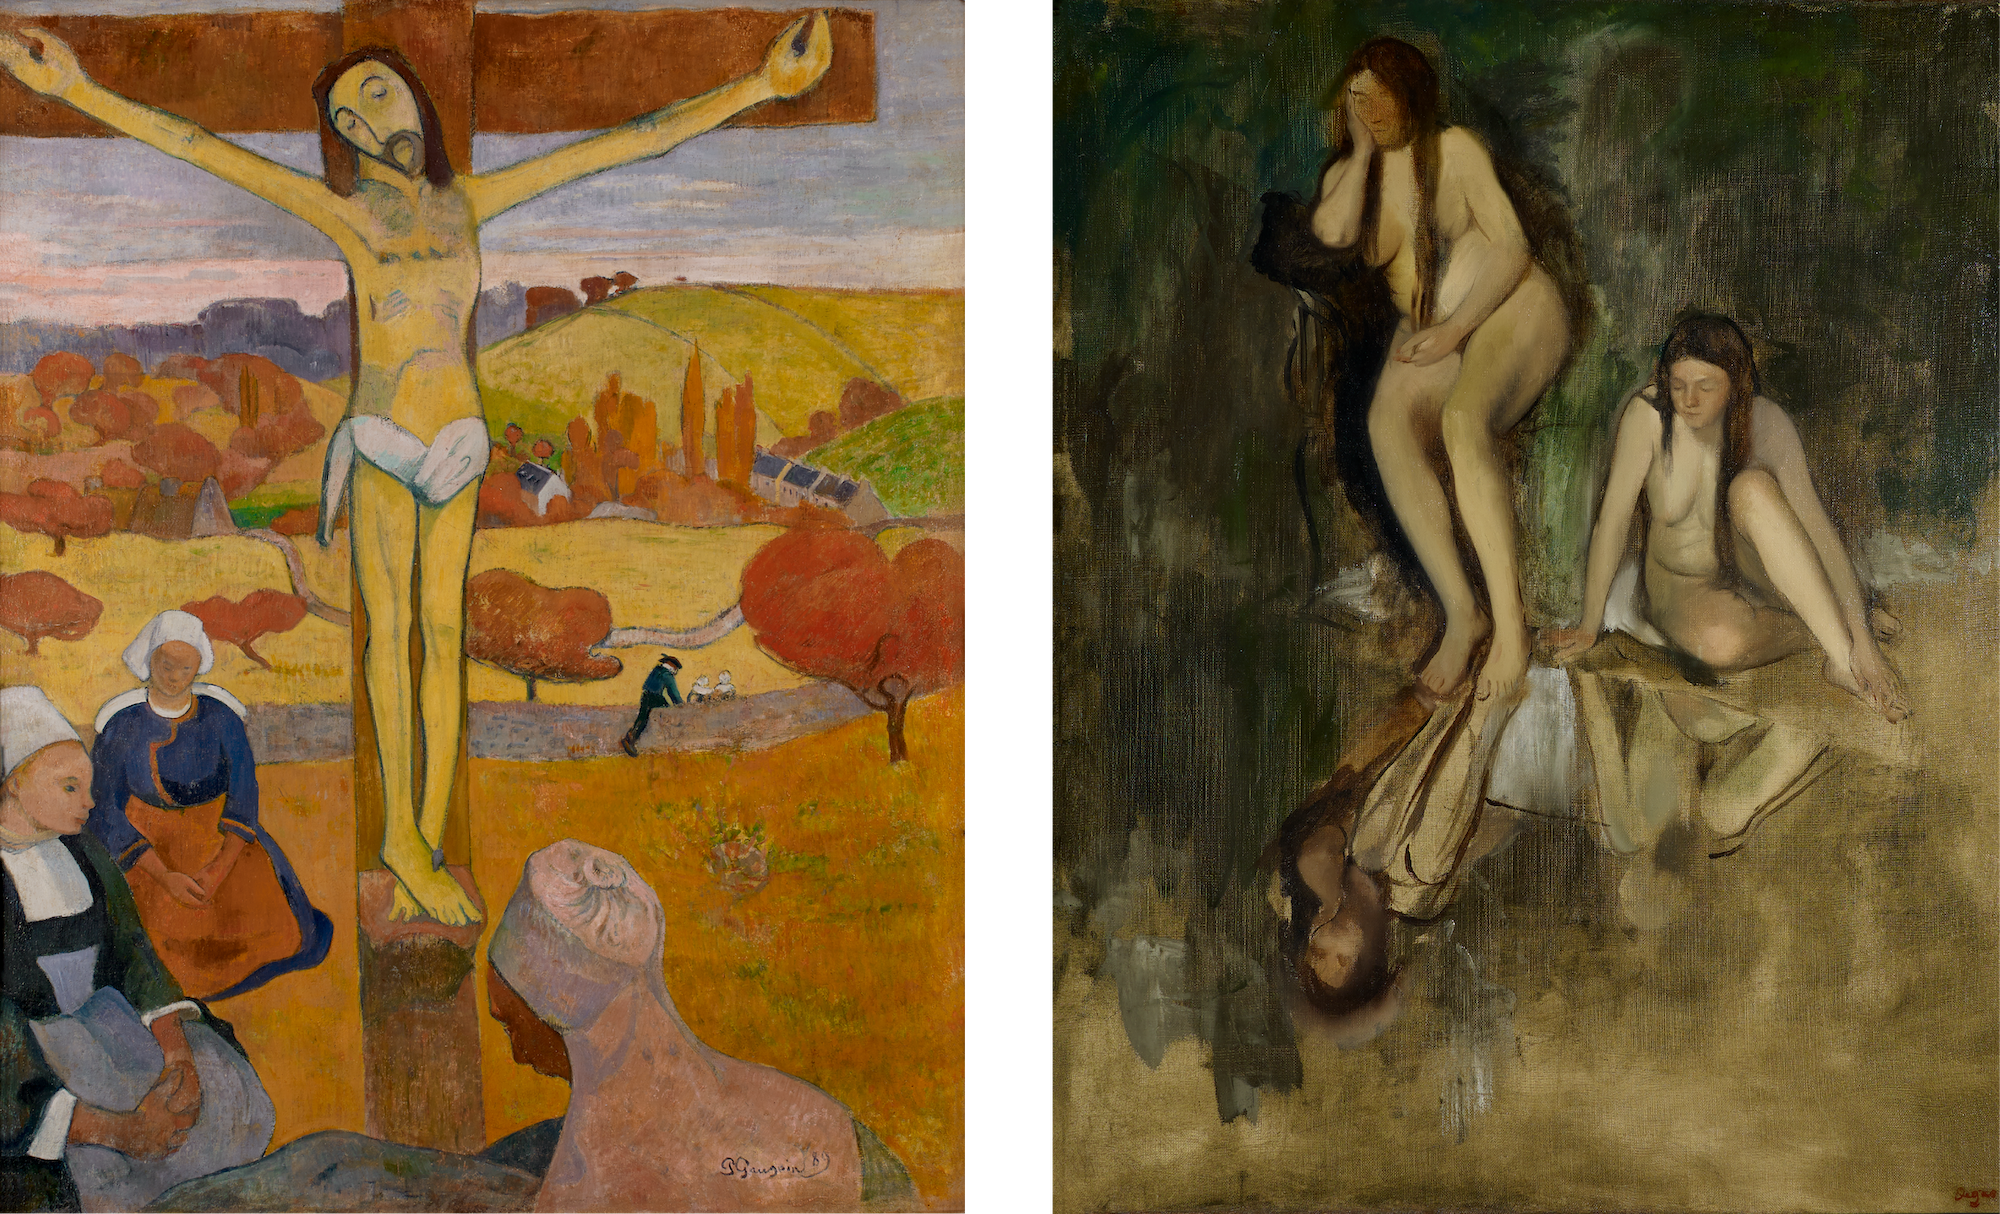 Two paintings: on the left, abstracted in color and form a Christ-figure hanged on a cross in front of a gathering of people, on the right two impressionistic female figures stare into a pool of dark water